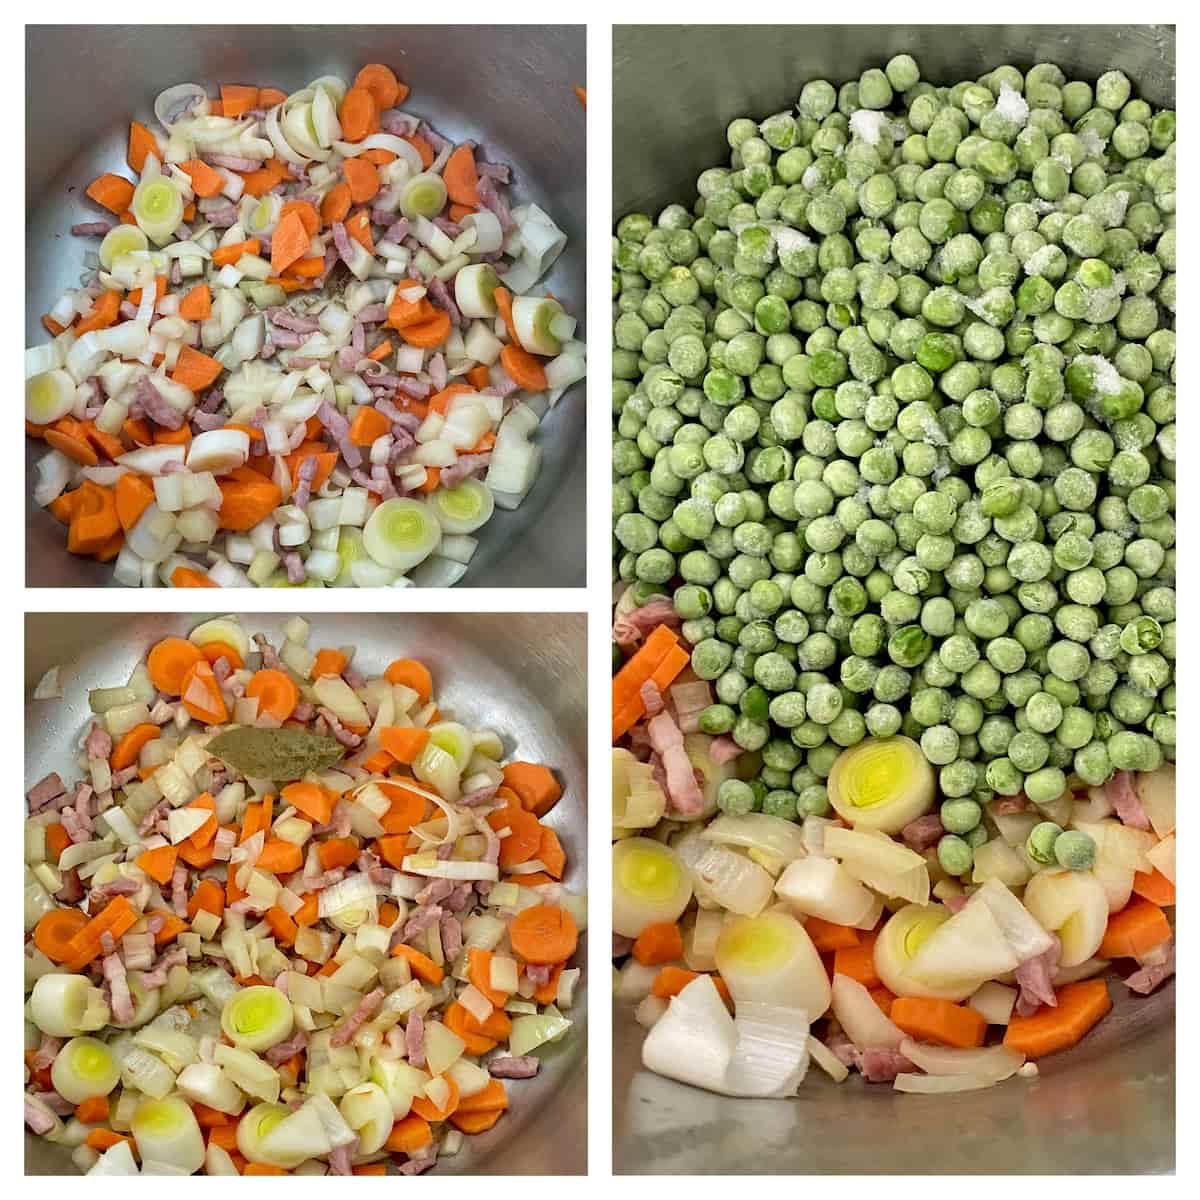 3 steps in the soup pot of stewing the vegetables first with bacon then adding frozen or fresh peas